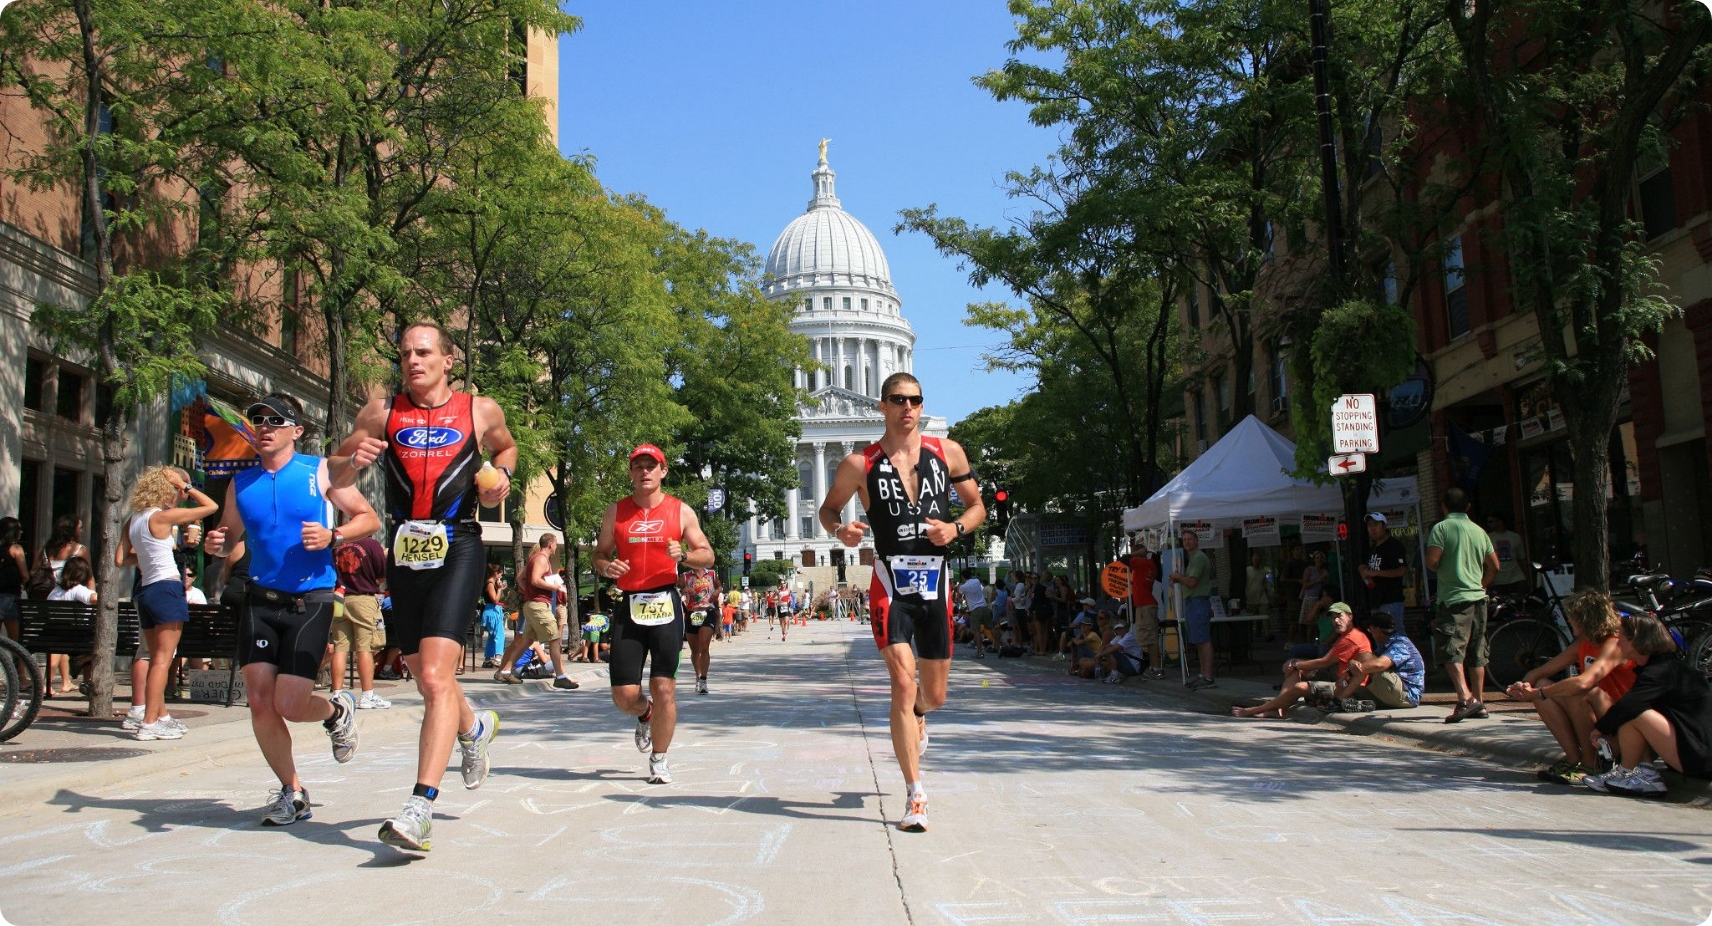 Runners compete in a race in Madison, WI.